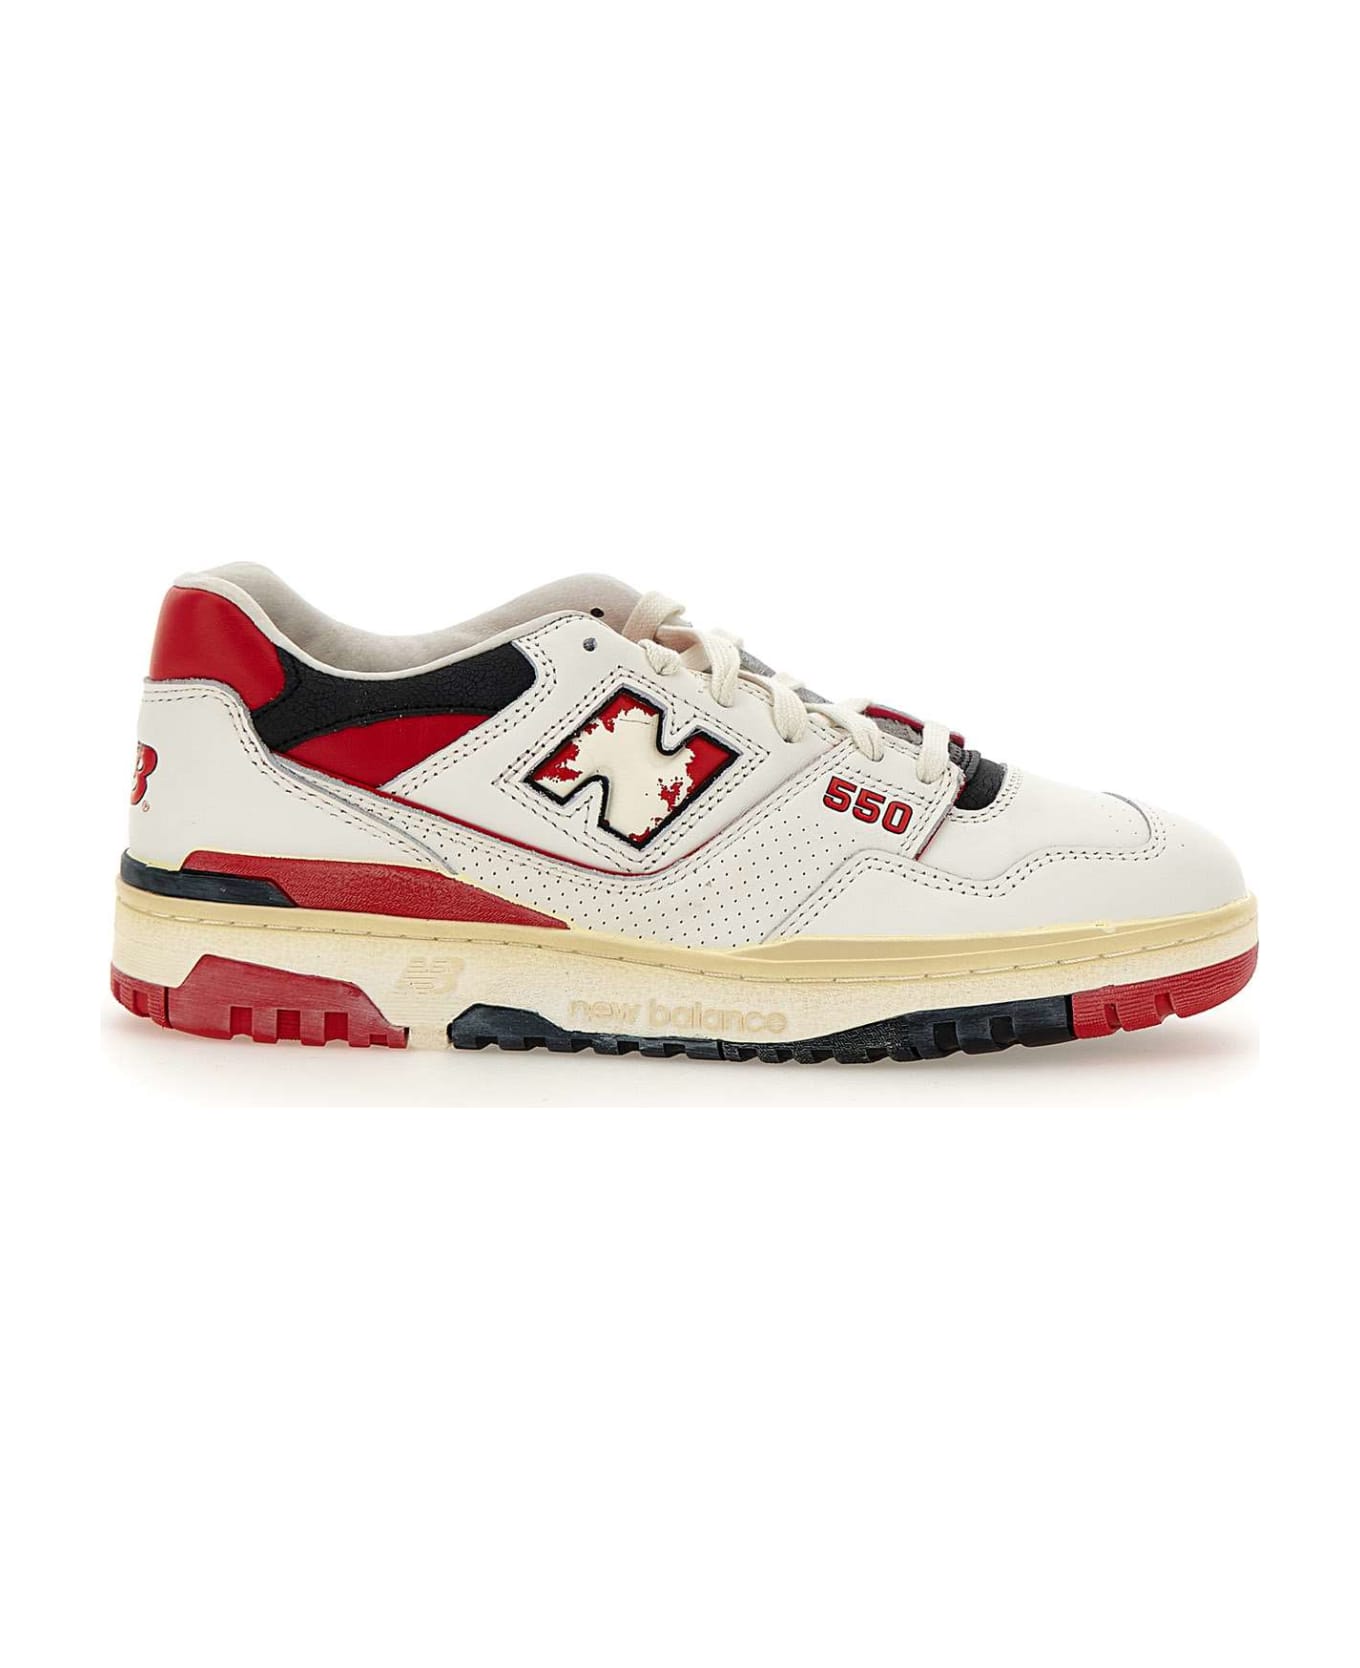 New Balance 'bb550vga' Leather Sneakers - Rosso スニーカー